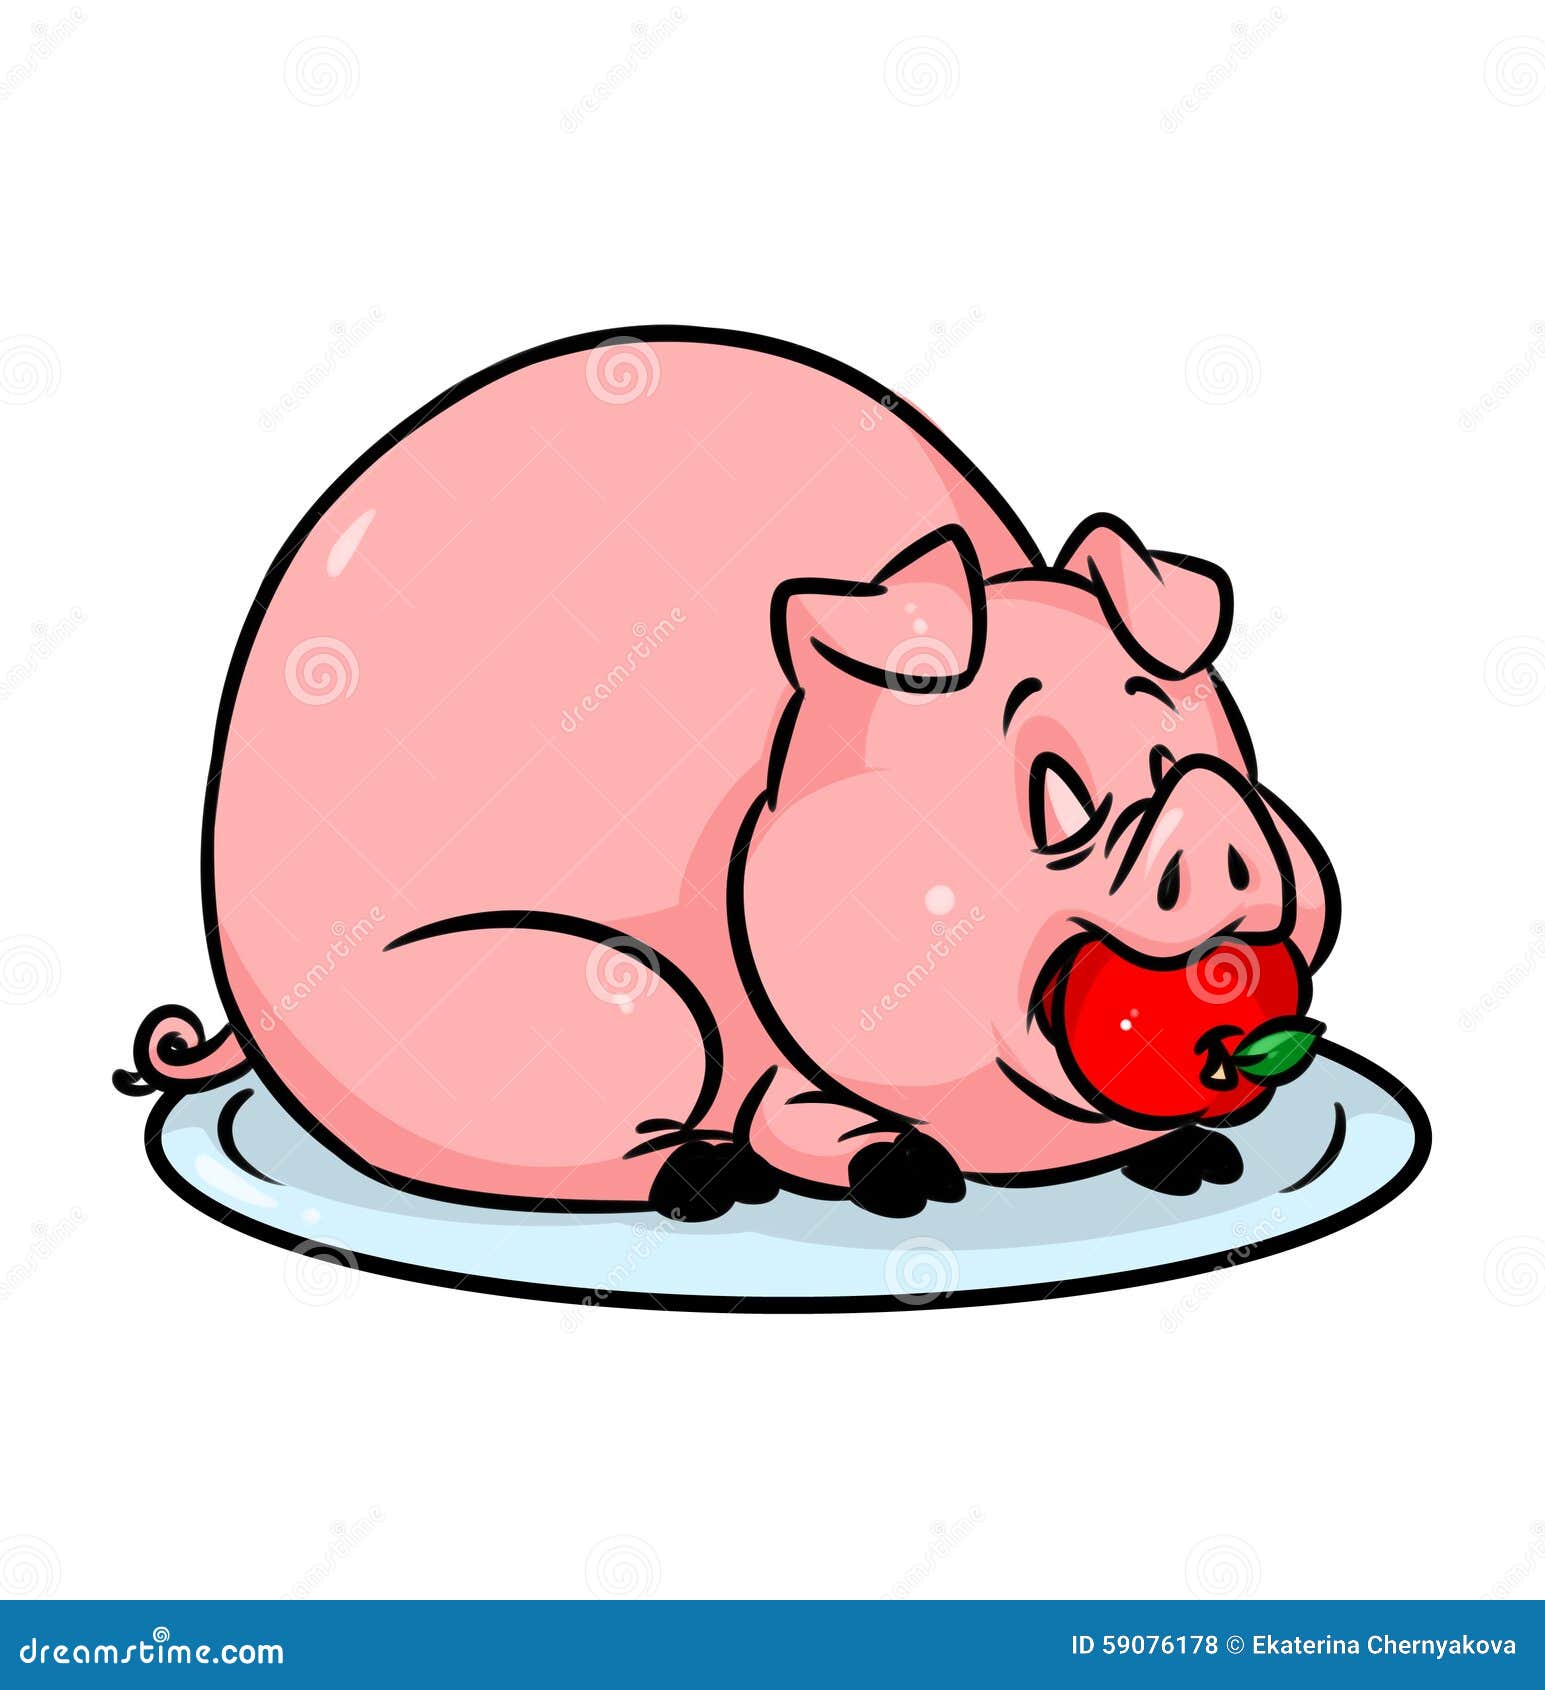 clipart pig cooking - photo #6